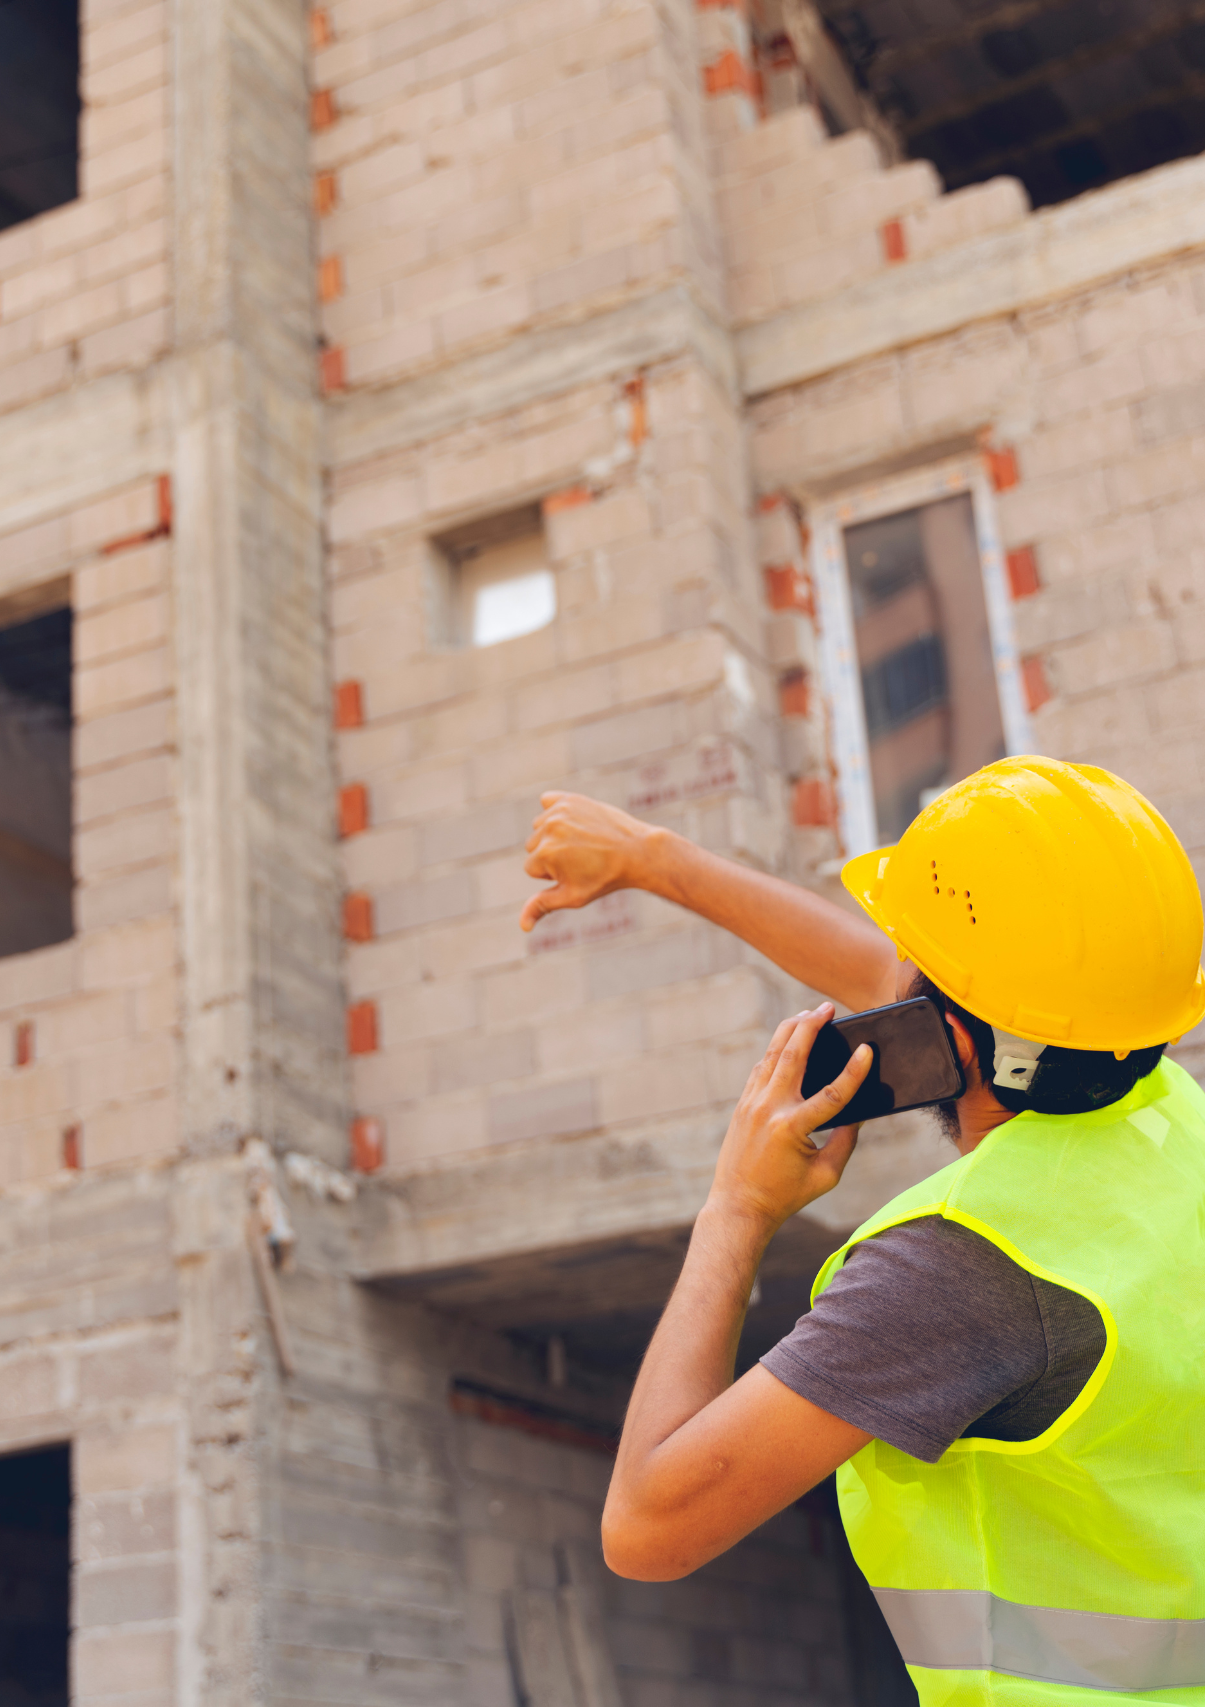 Engineer contacts Florida construction defect lawyers